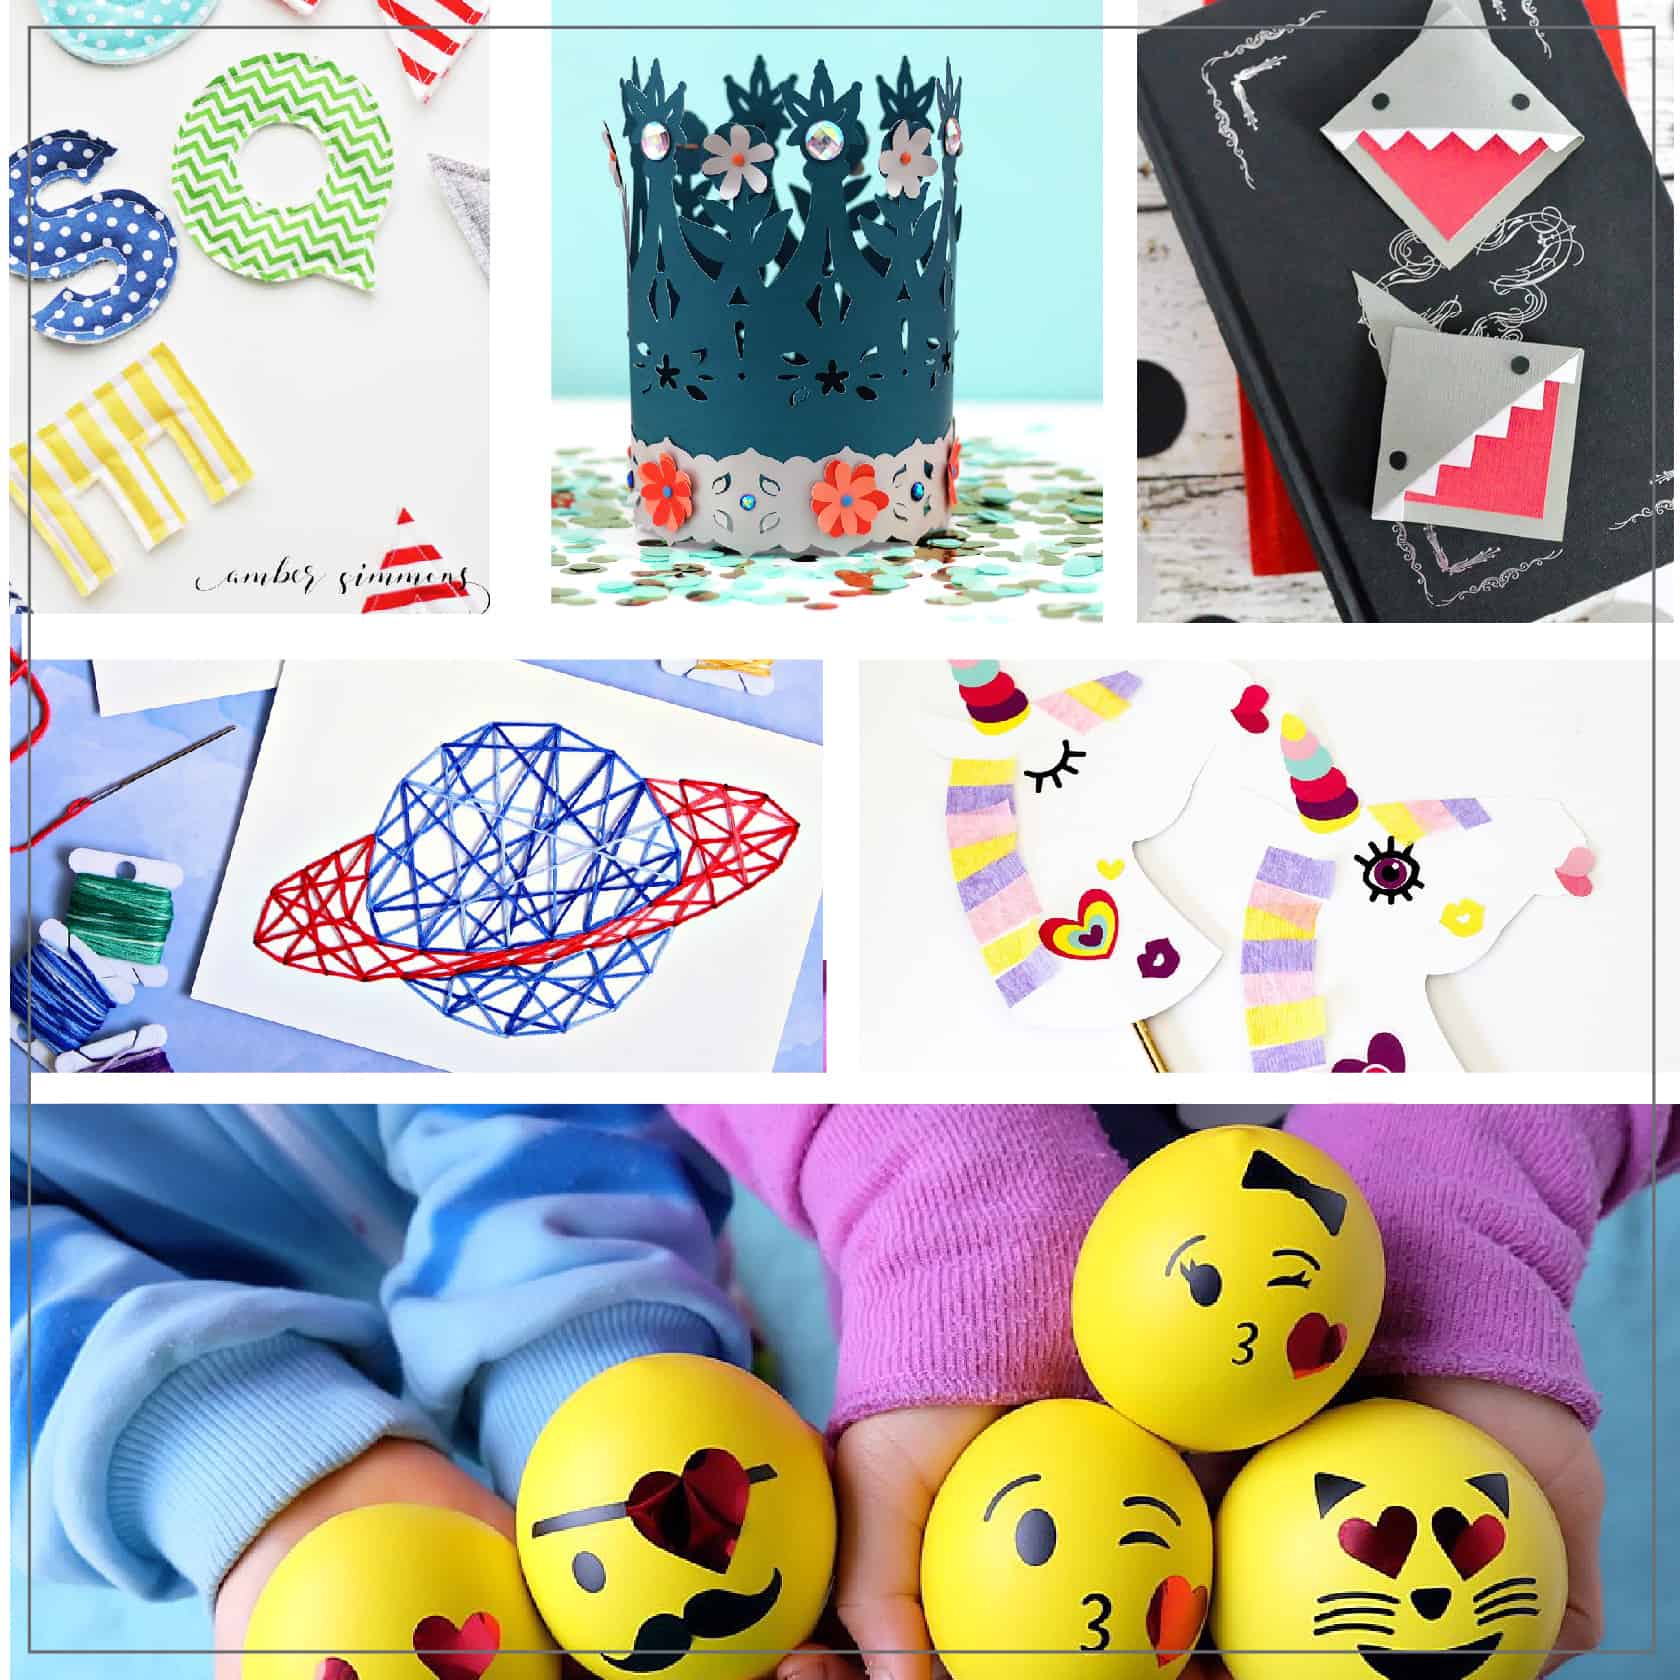 More Than 21 Felt Crafts You Can Make with Your Cricut